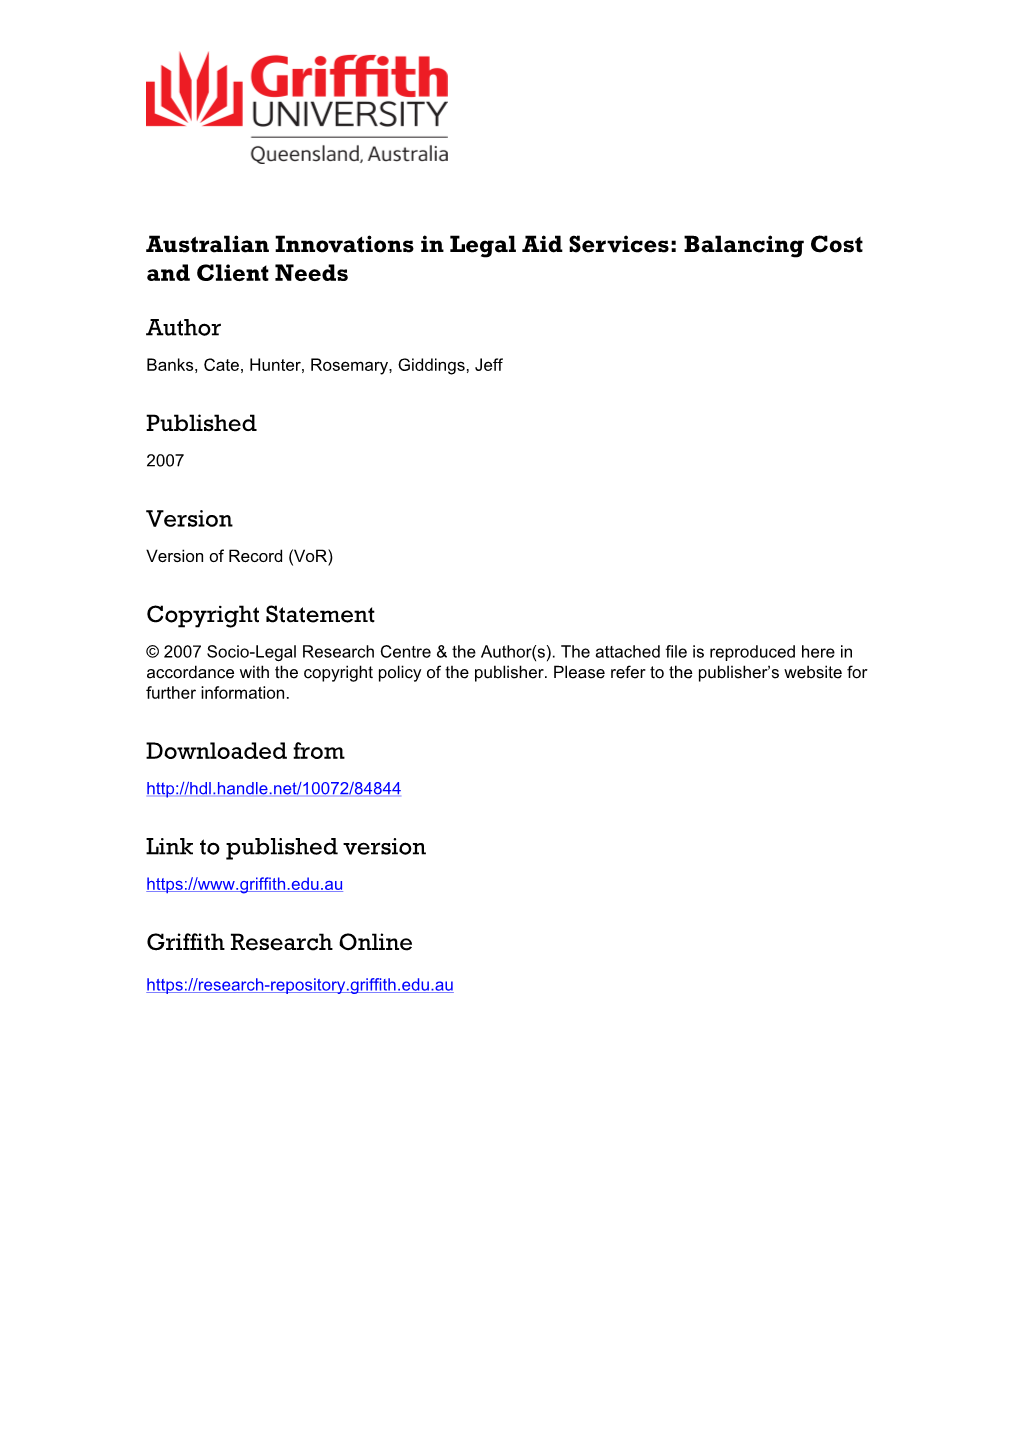 Australian Innovations in Legal Aid Services: Balancing Cost and Client Needs